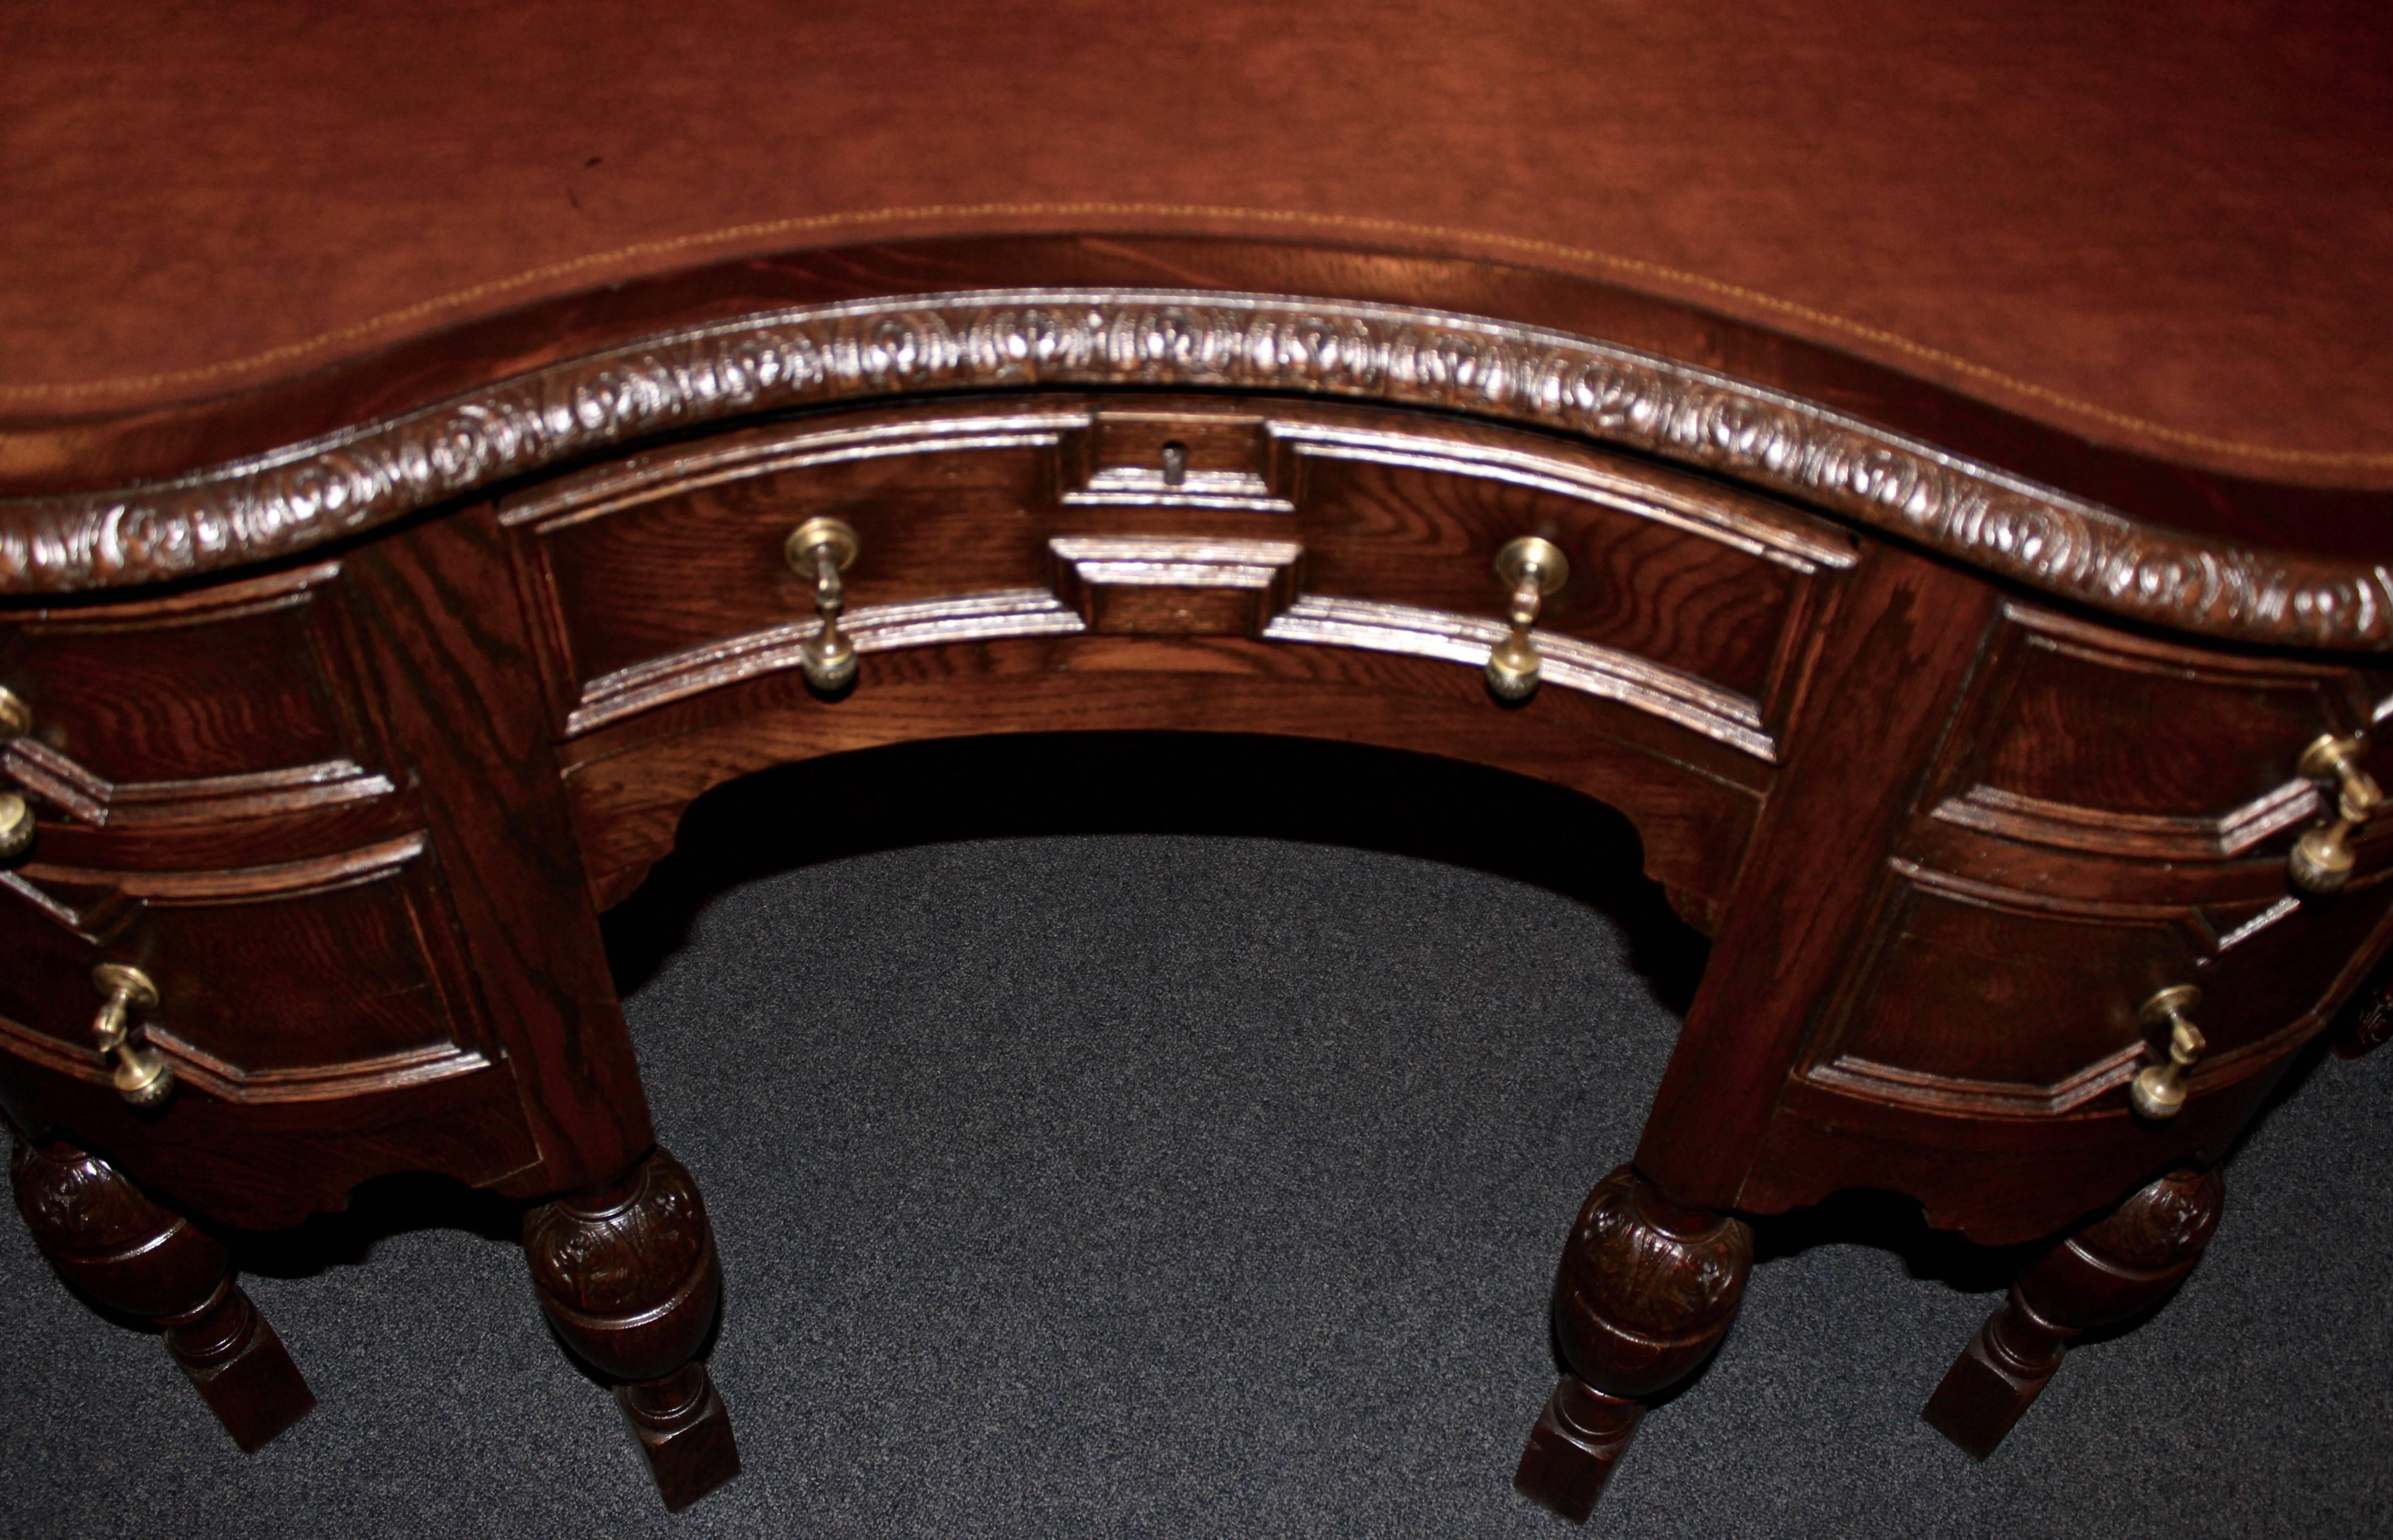 Early 20th Century English Jacobean Kidney Desk In Good Condition For Sale In Santa Ana, CA